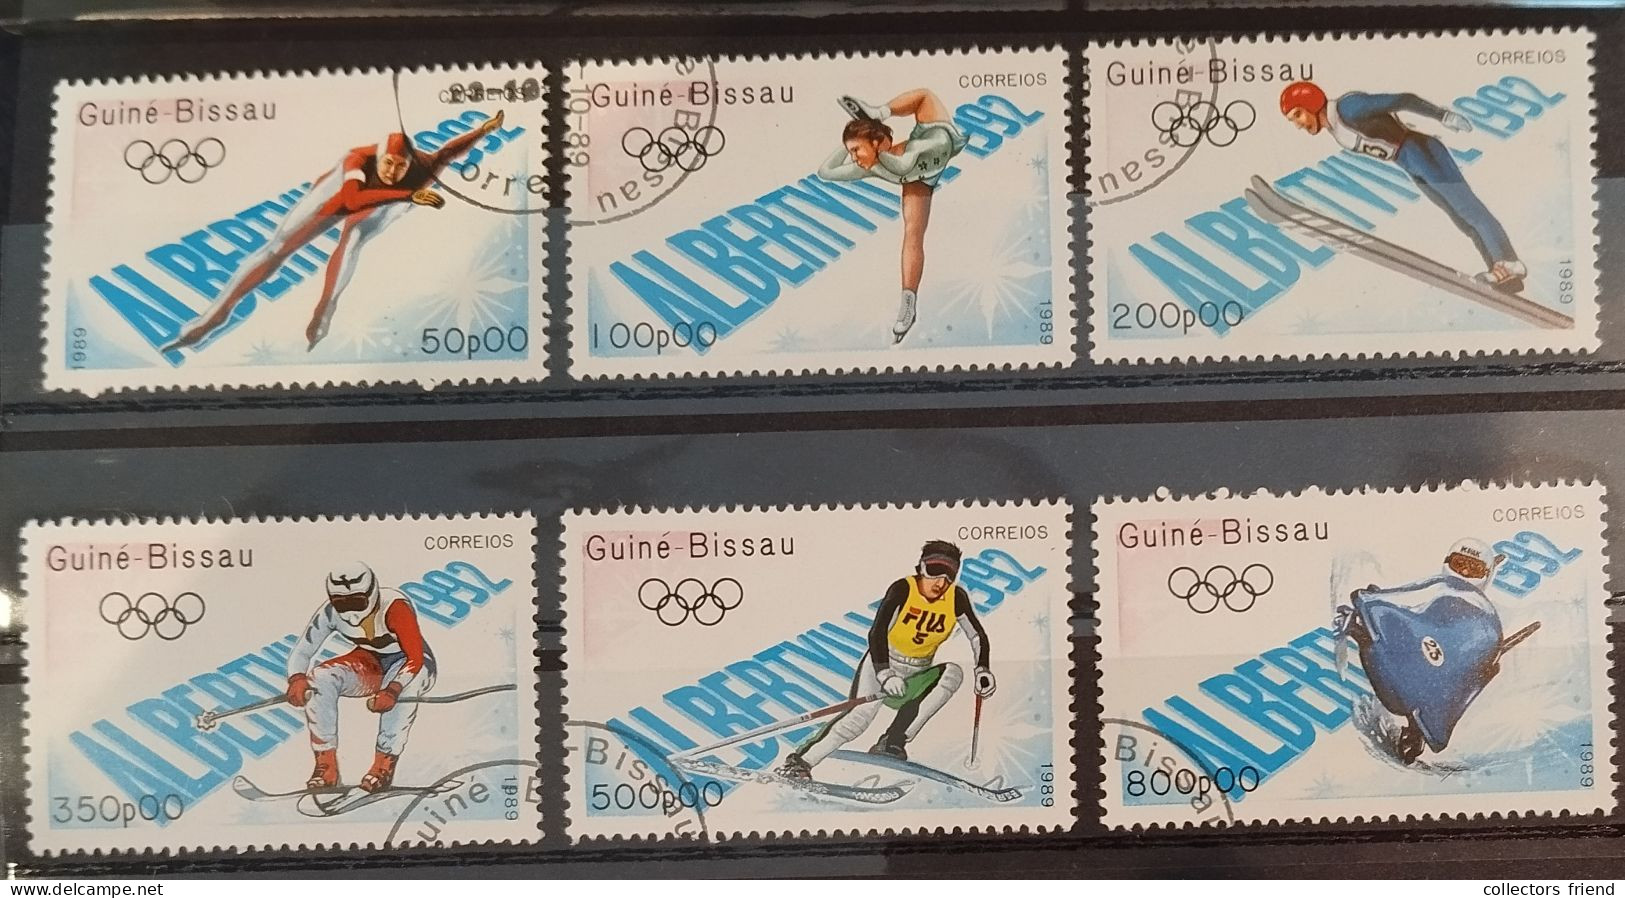 Guinea Bissau - Olympia Olimpiques Olympic Games -  Albertville '92 - 6 Stamps - Used - Hiver 1992: Albertville